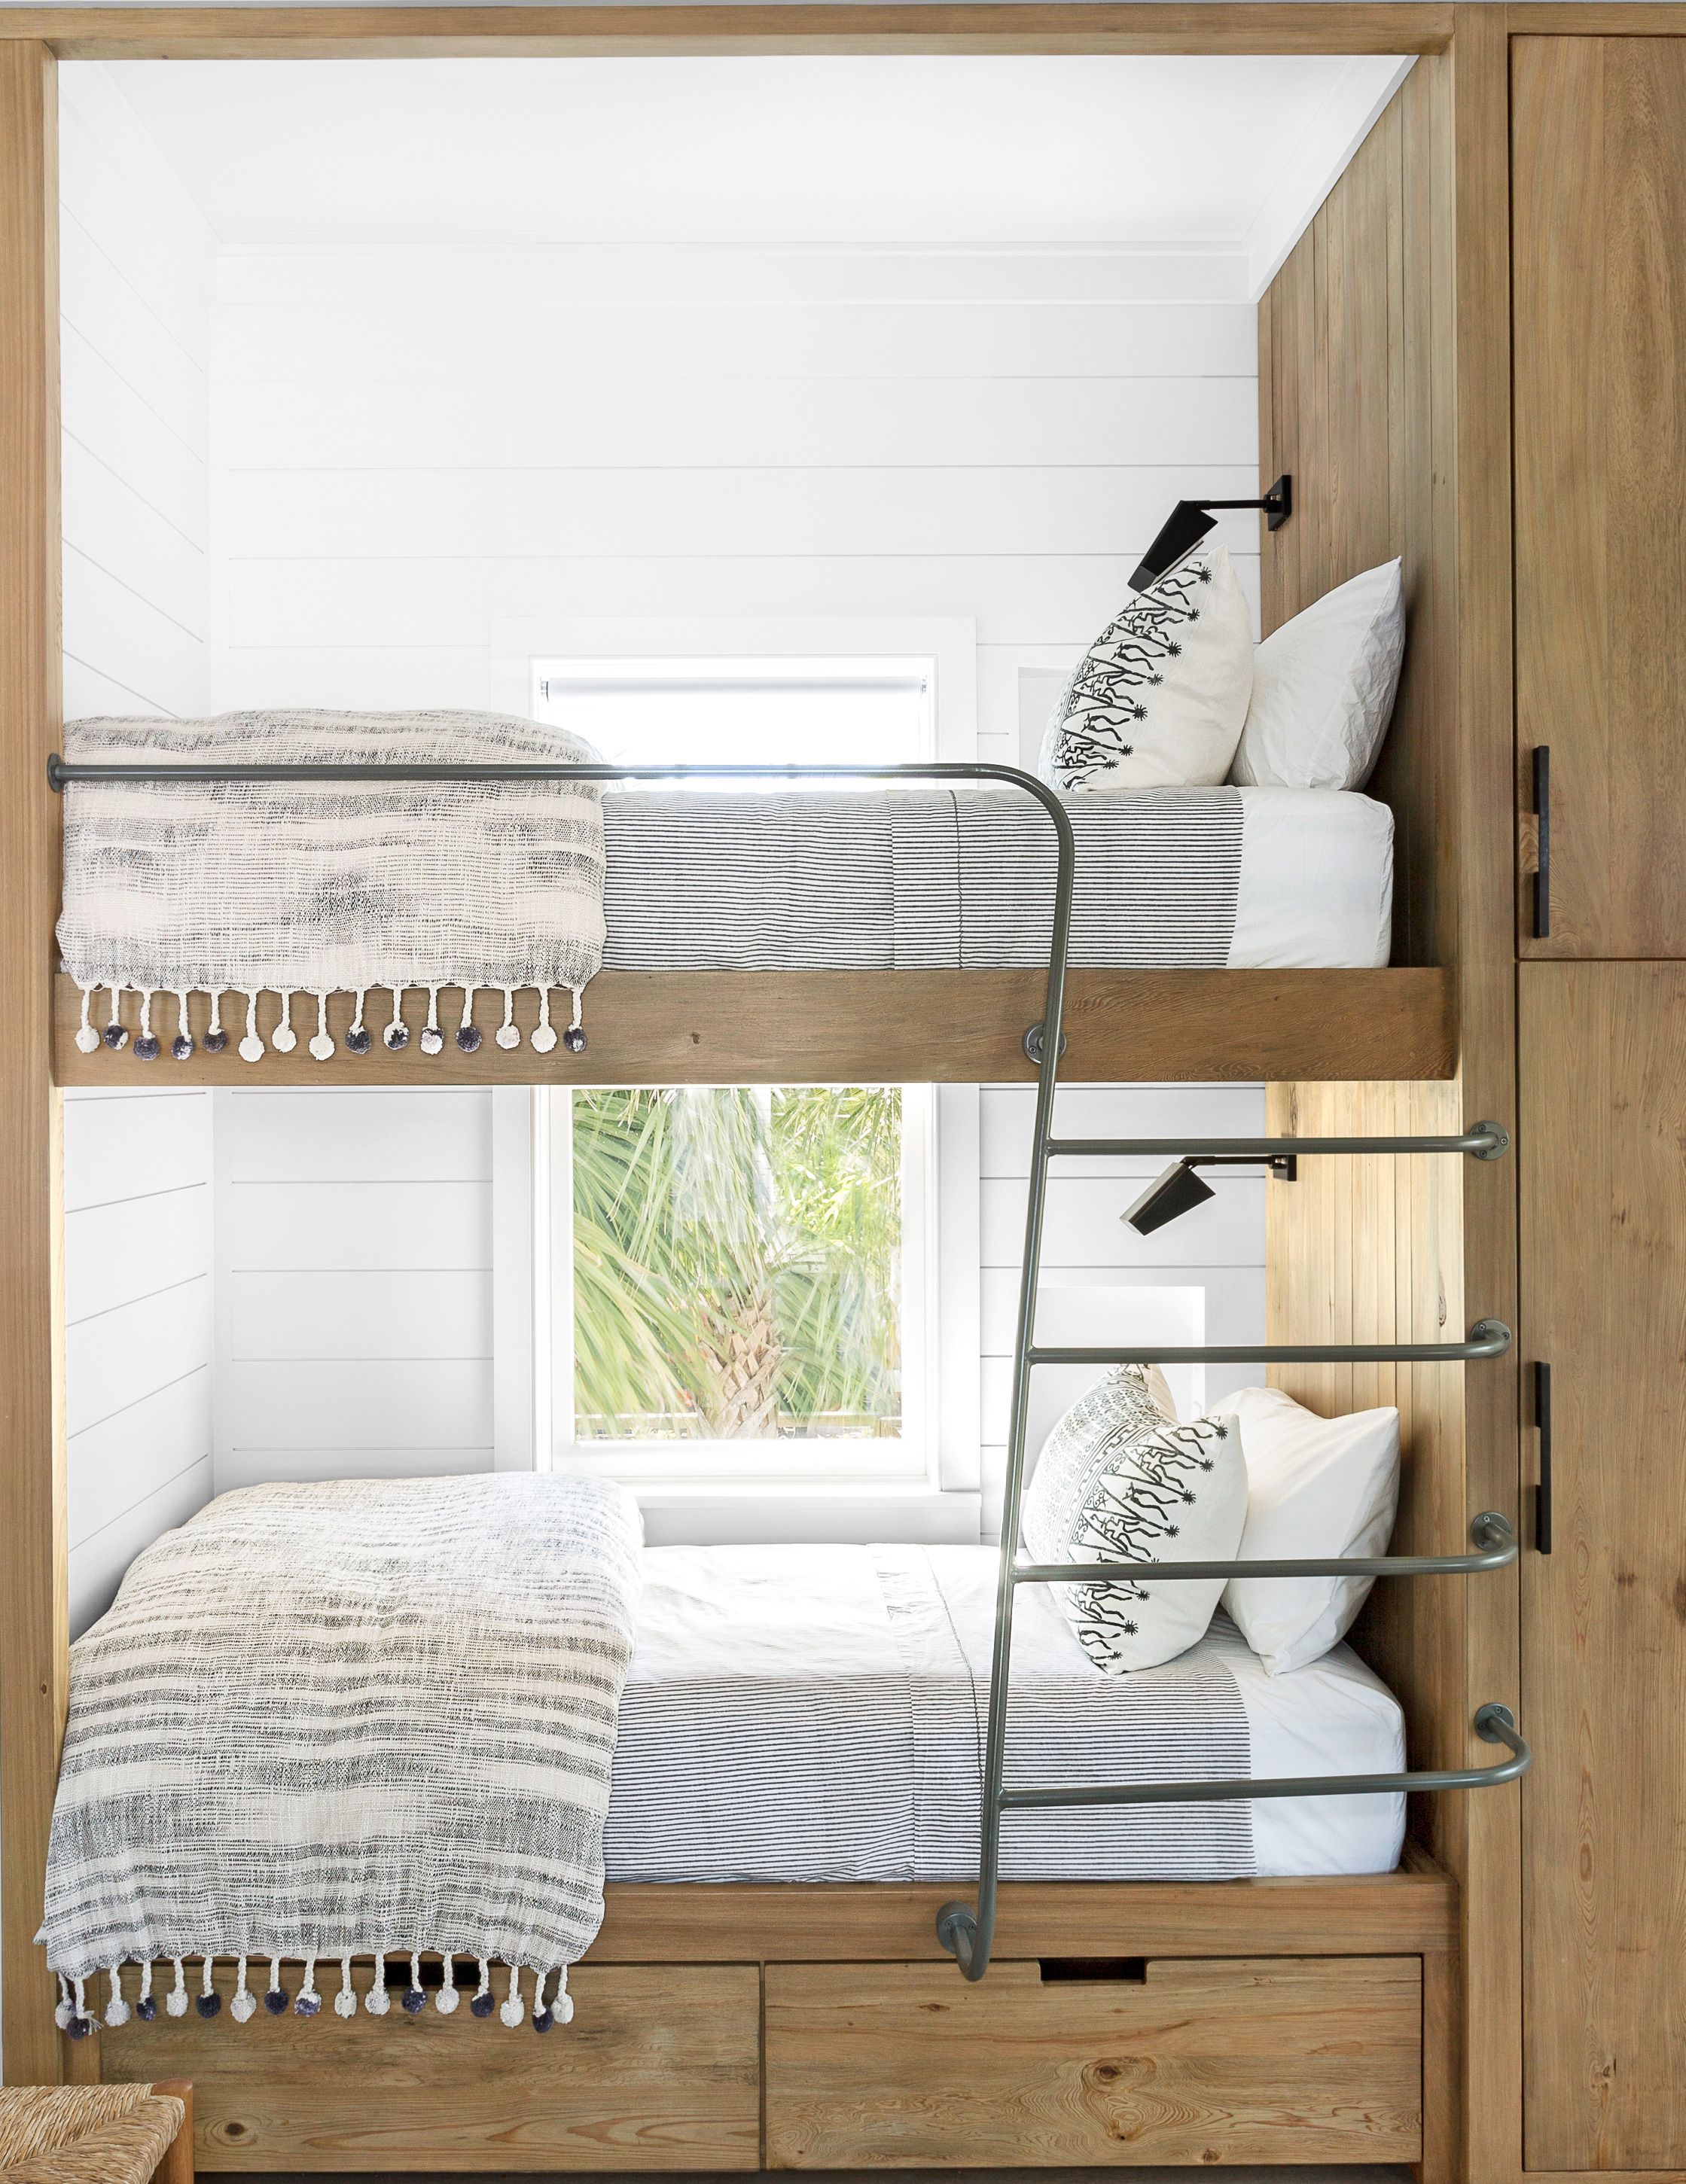 16 Cool Bunk Beds Bed Designs, Bunk Bed With Room Under